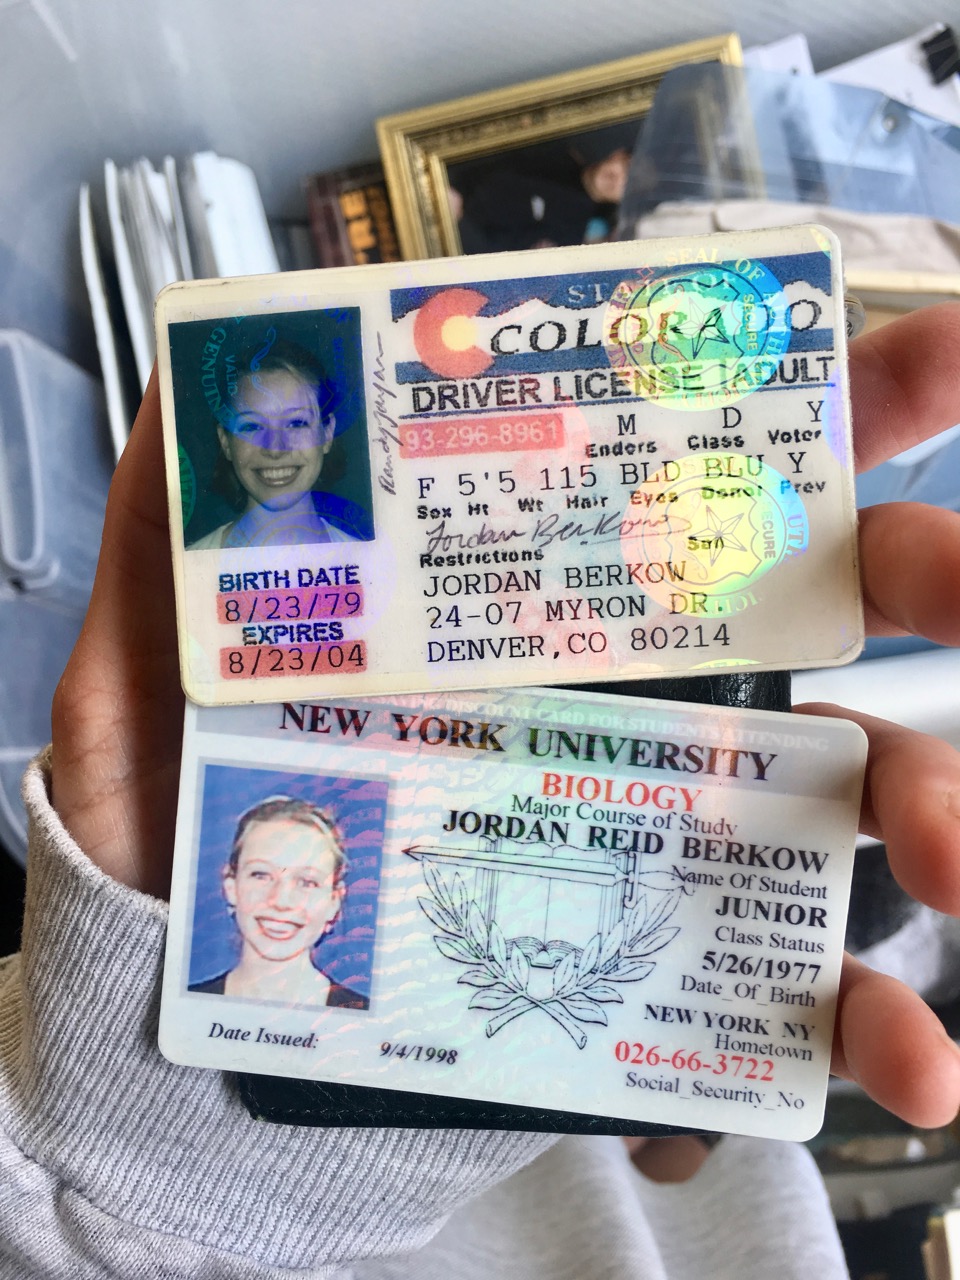 Fake IDs from the late 1990s